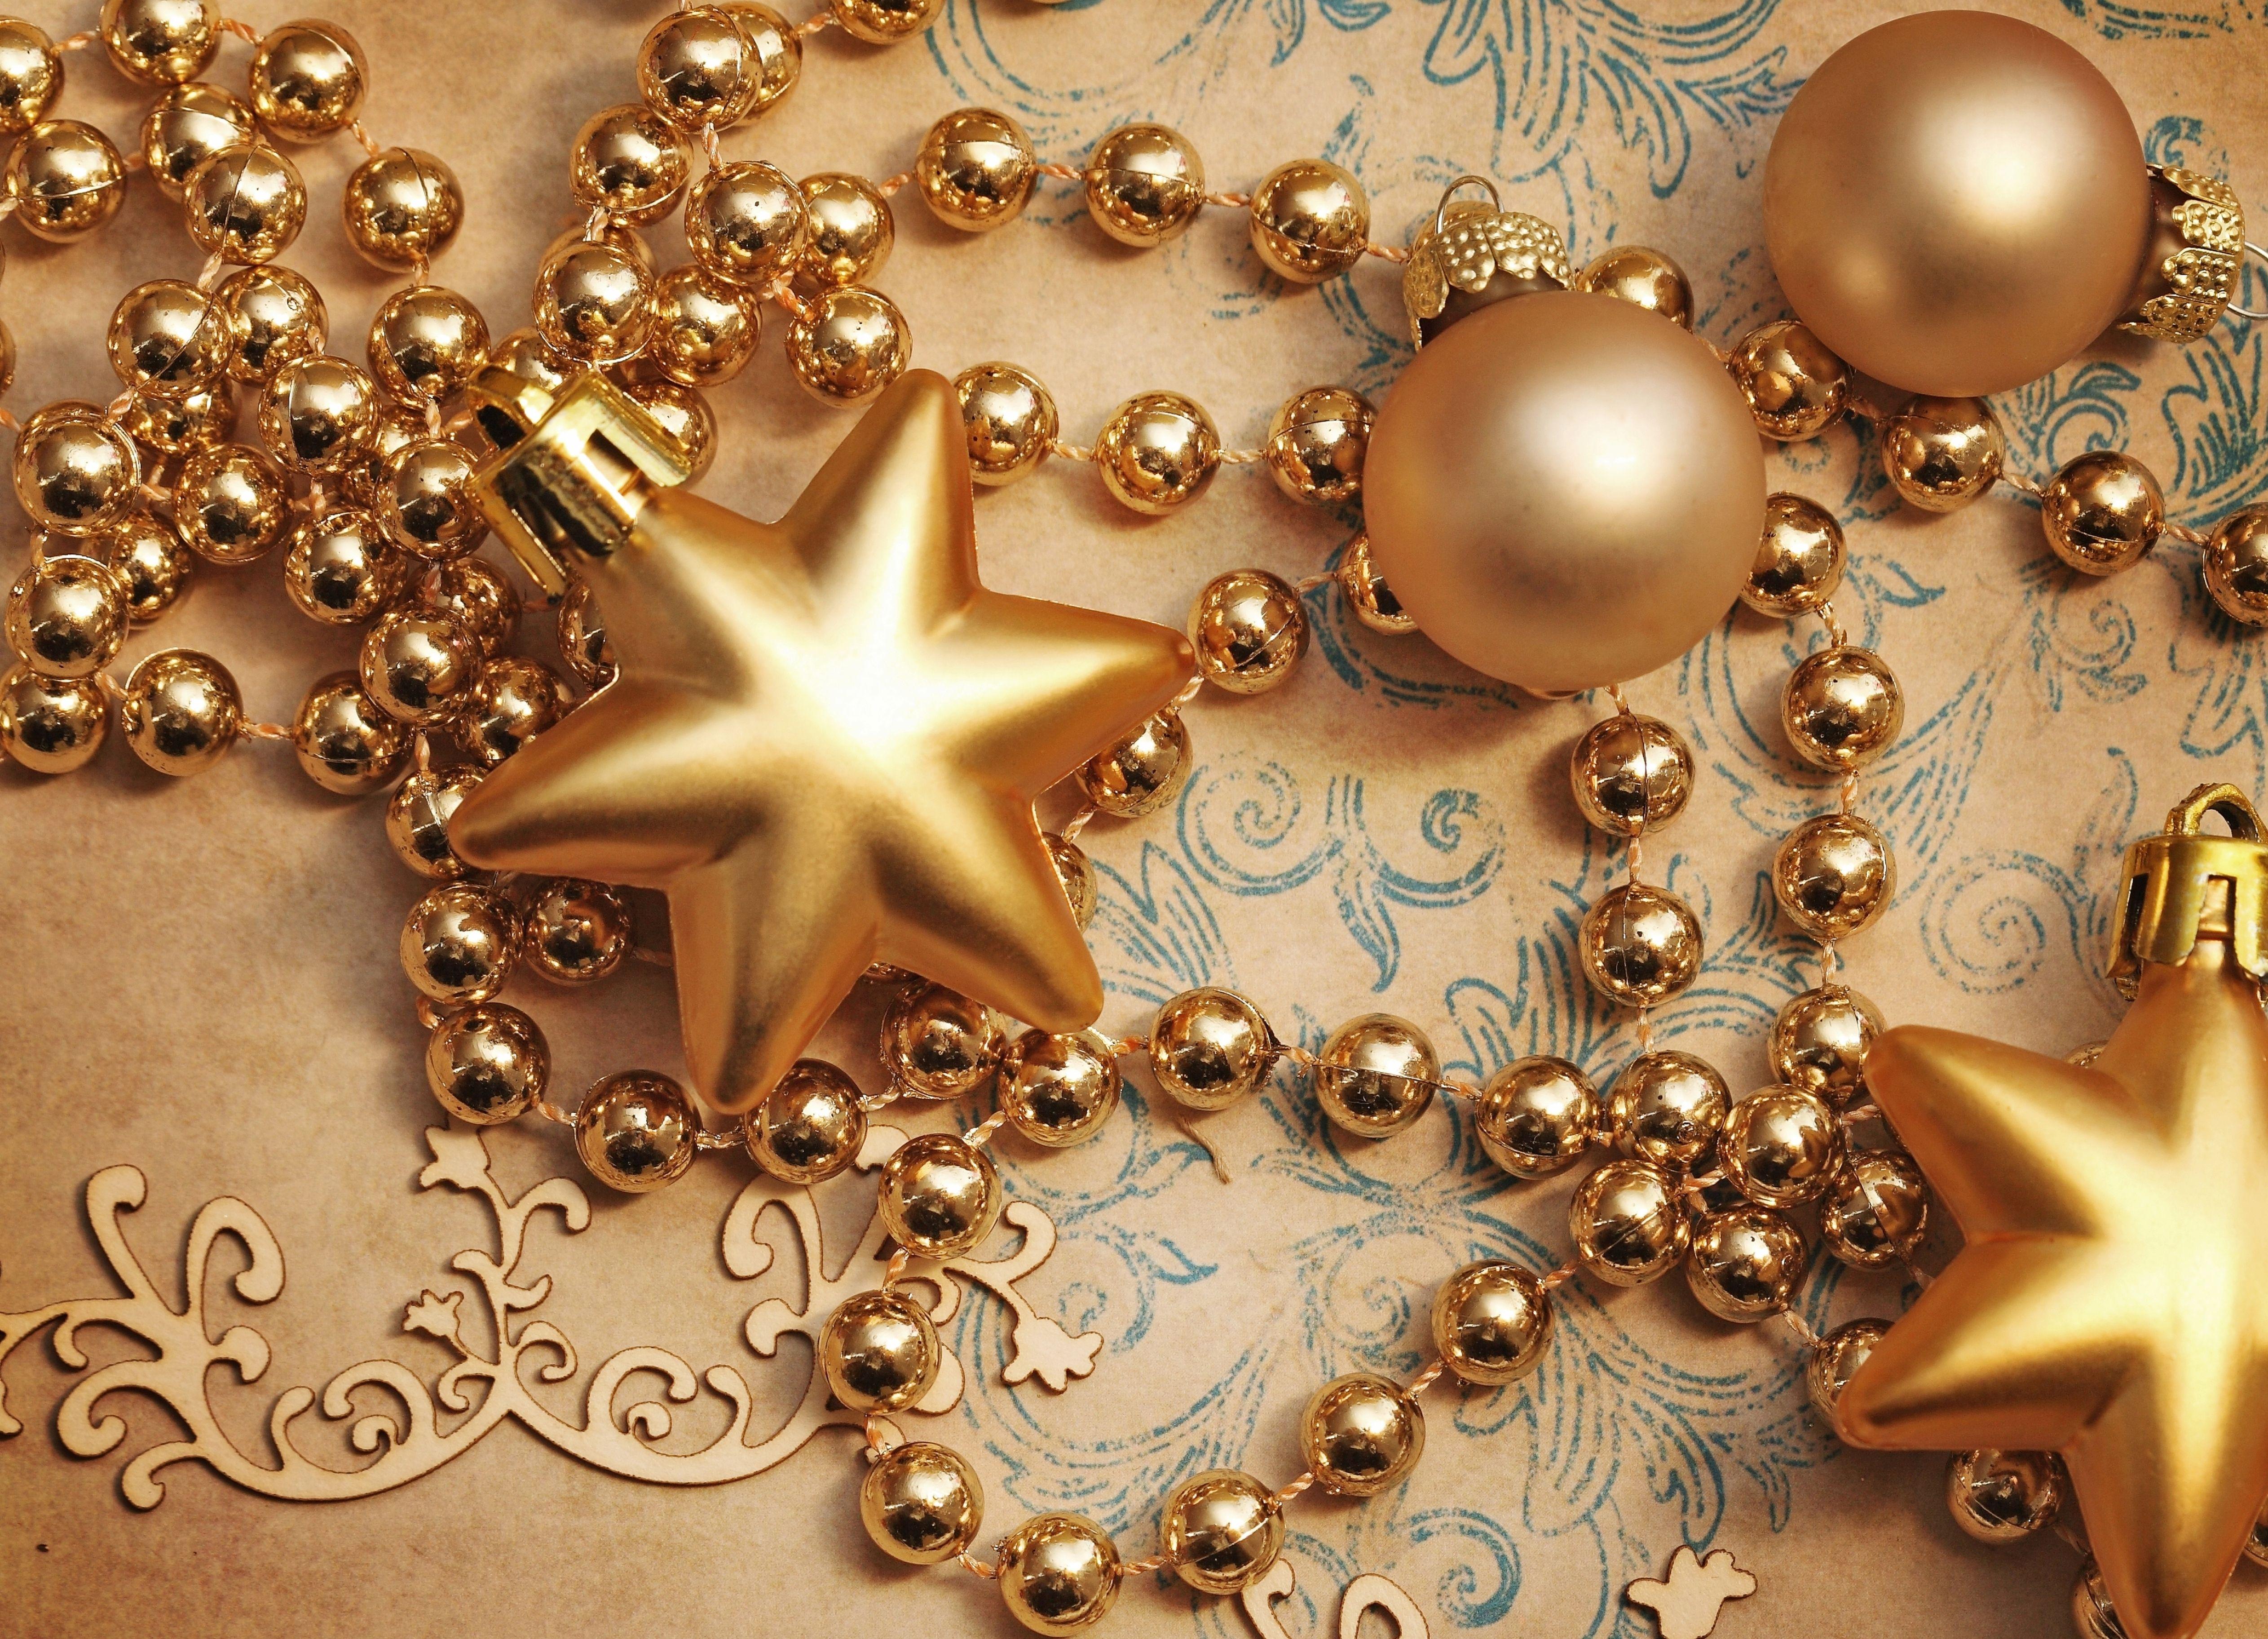 Gold stars for the Christmas tree wallpaper and image